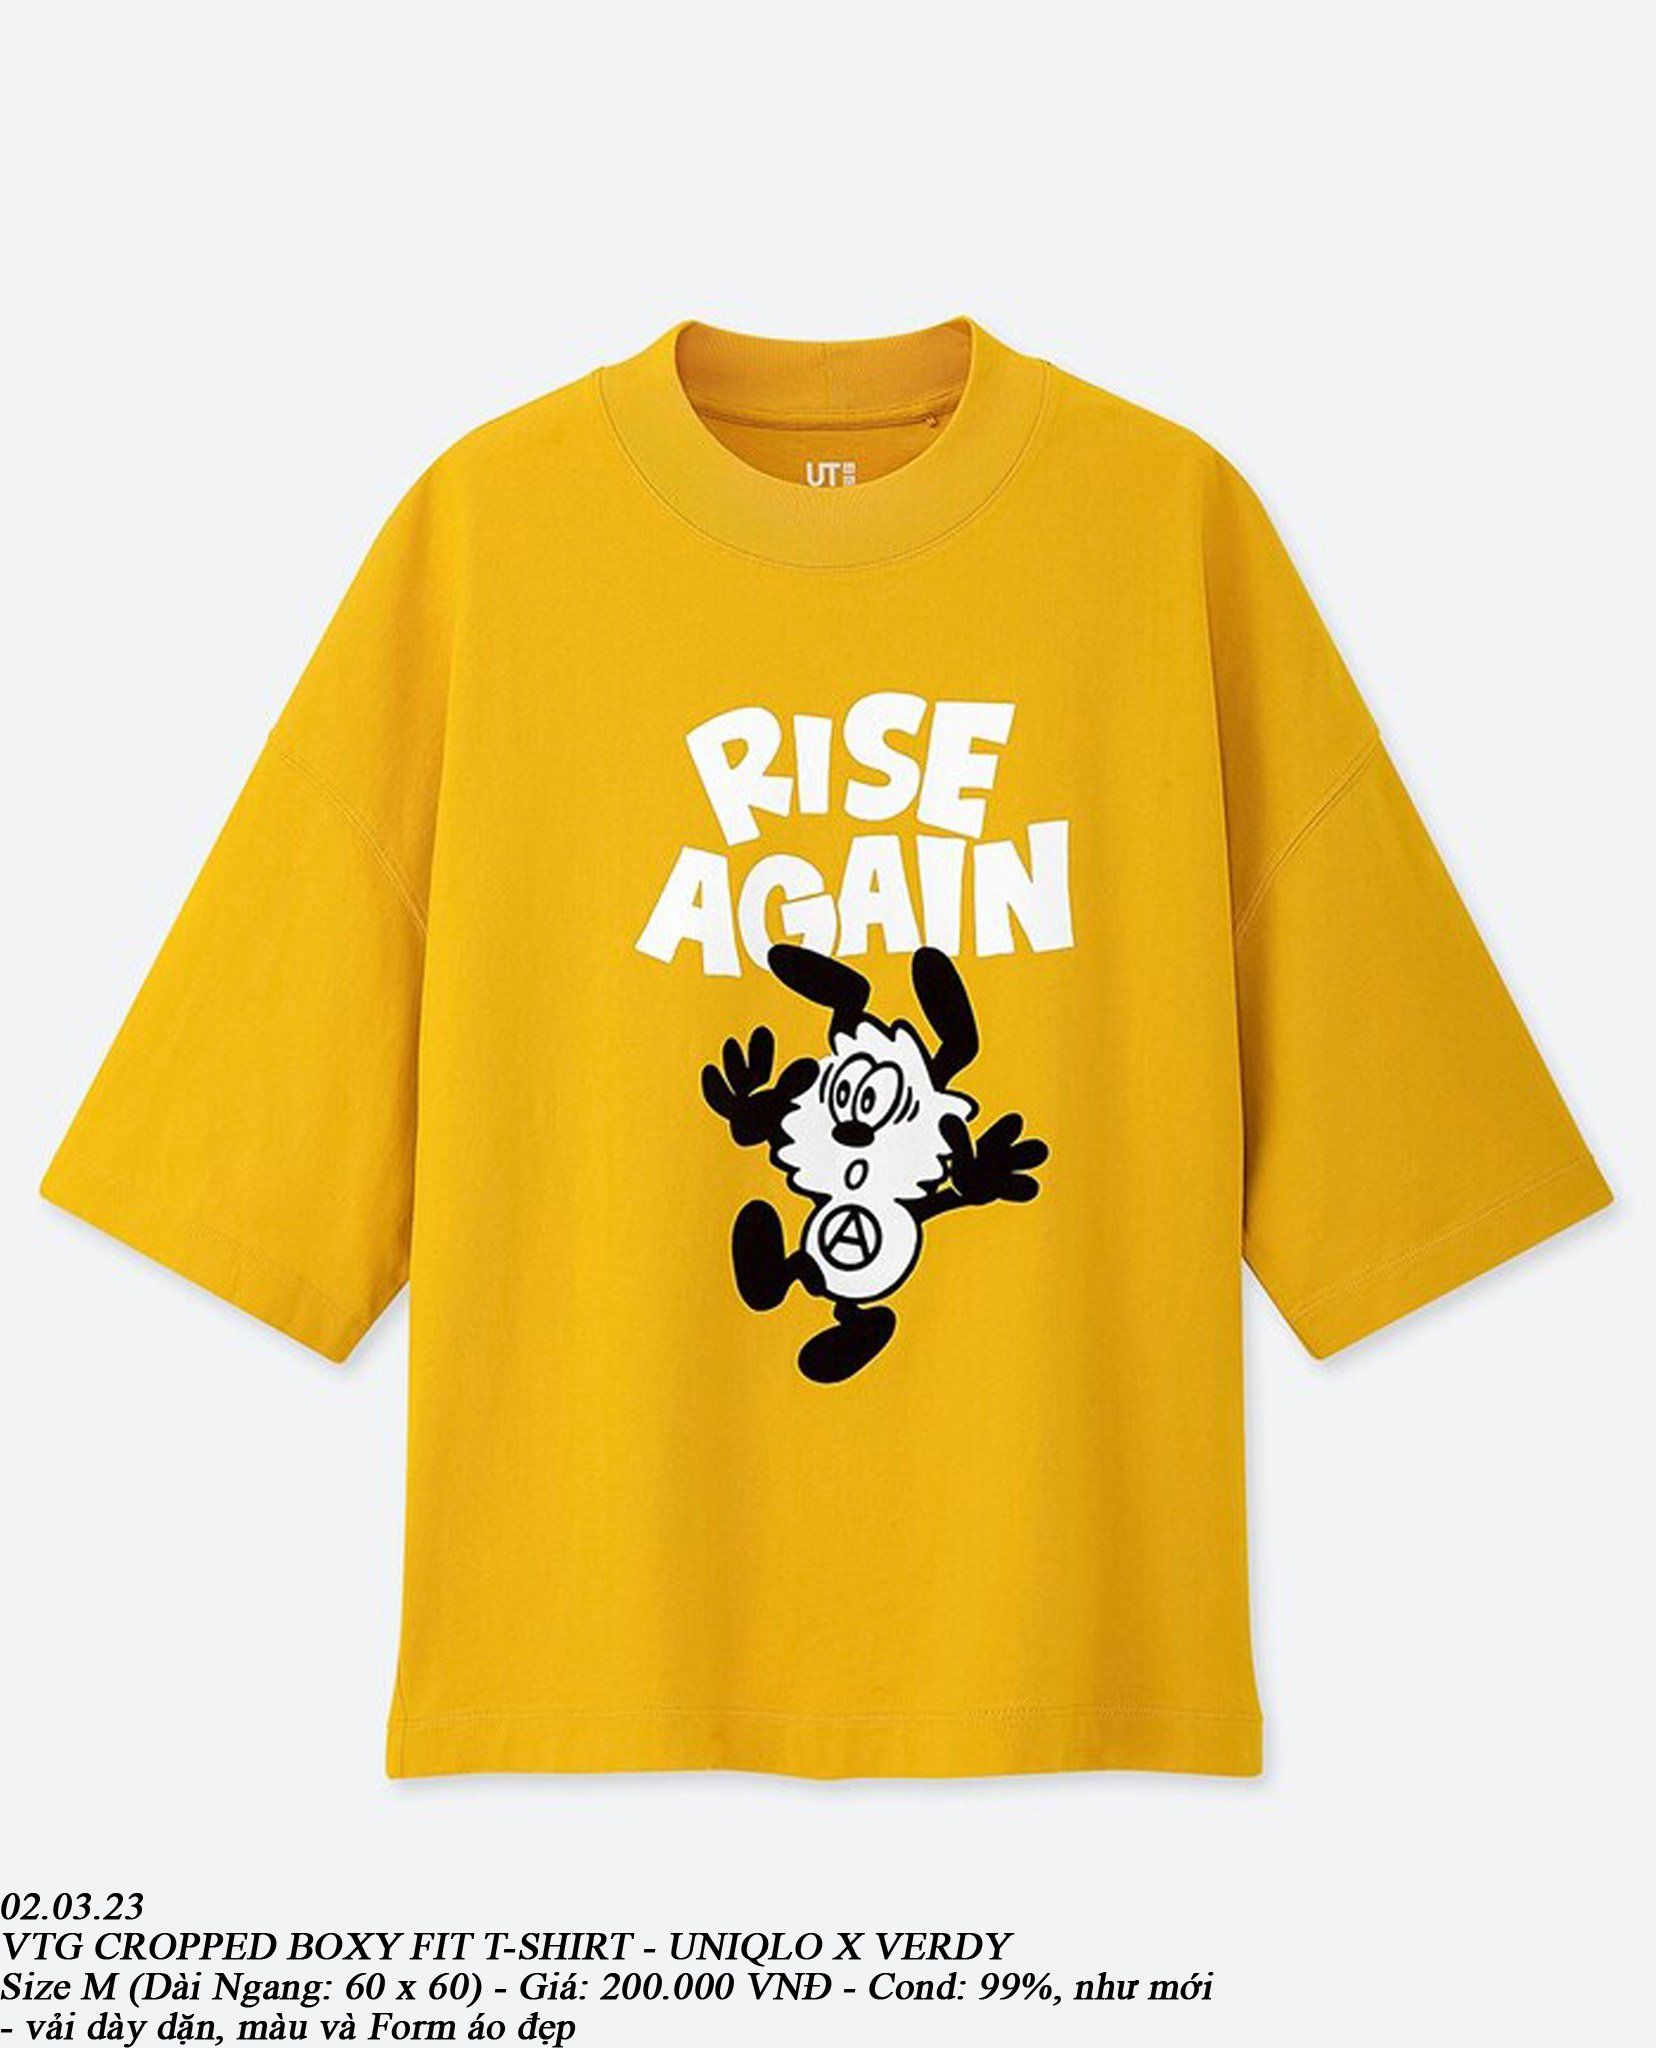 UNIQLO x Peanuts Has A New RetroThemed Collection